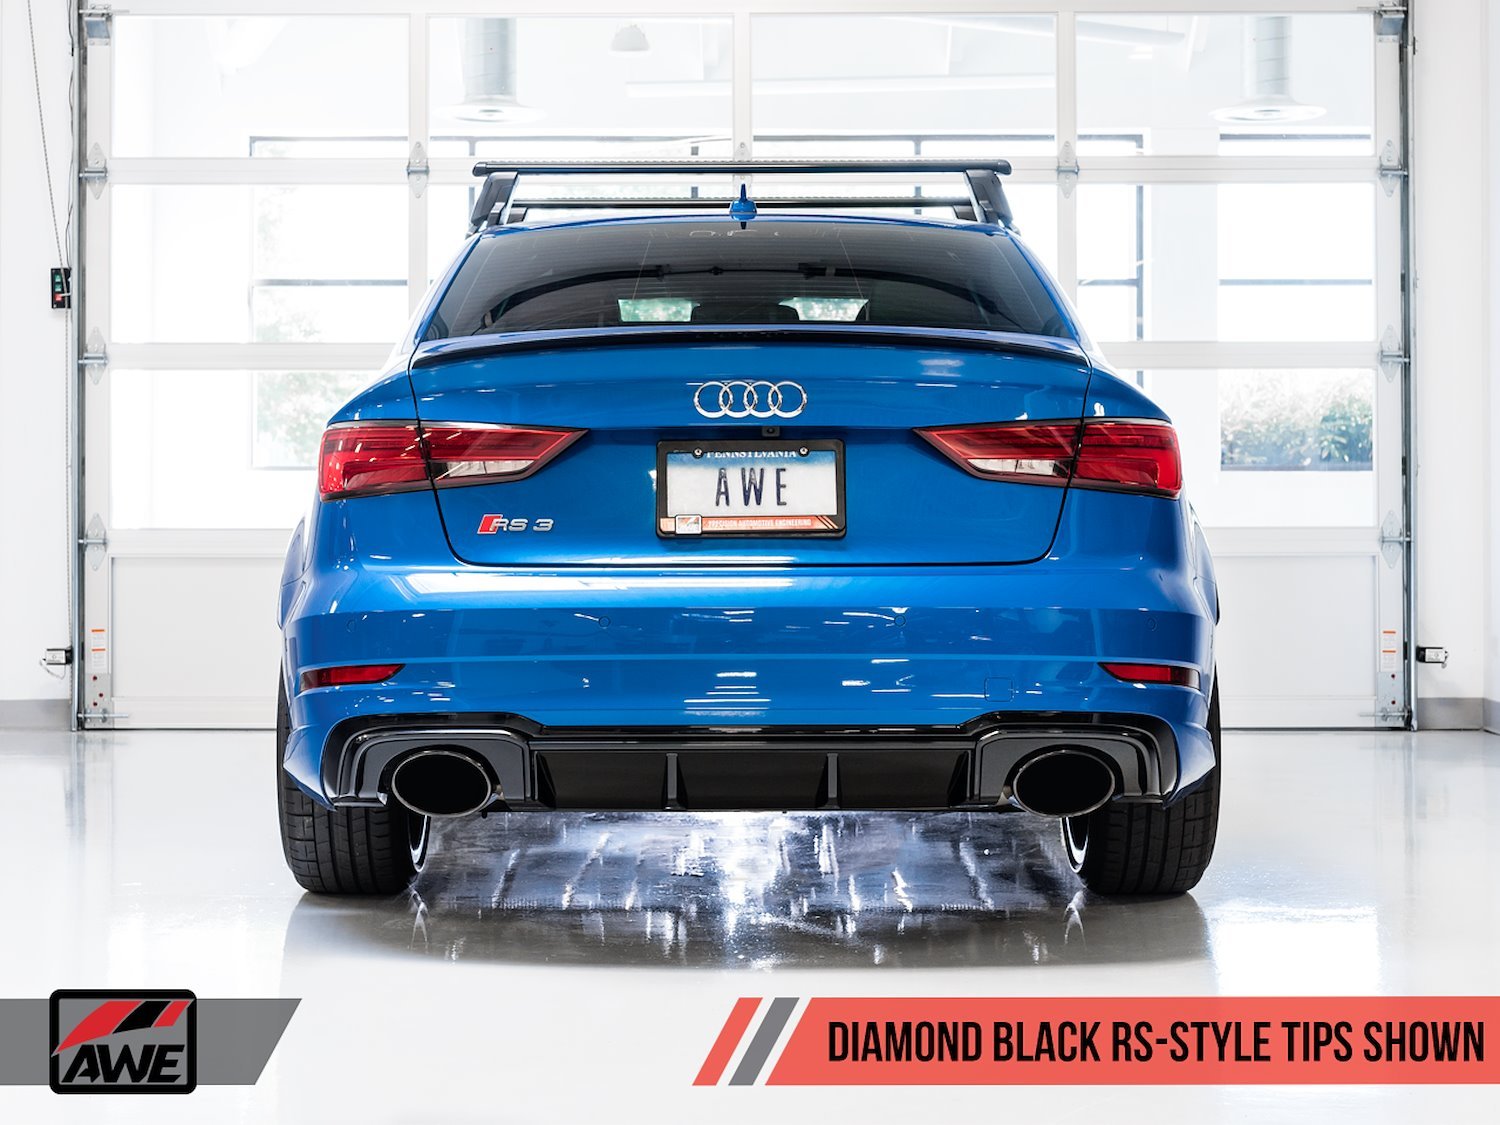 AWE Track Edition Exhaust for Audi 8V RS 3 - Diamond Black RS-style Tips